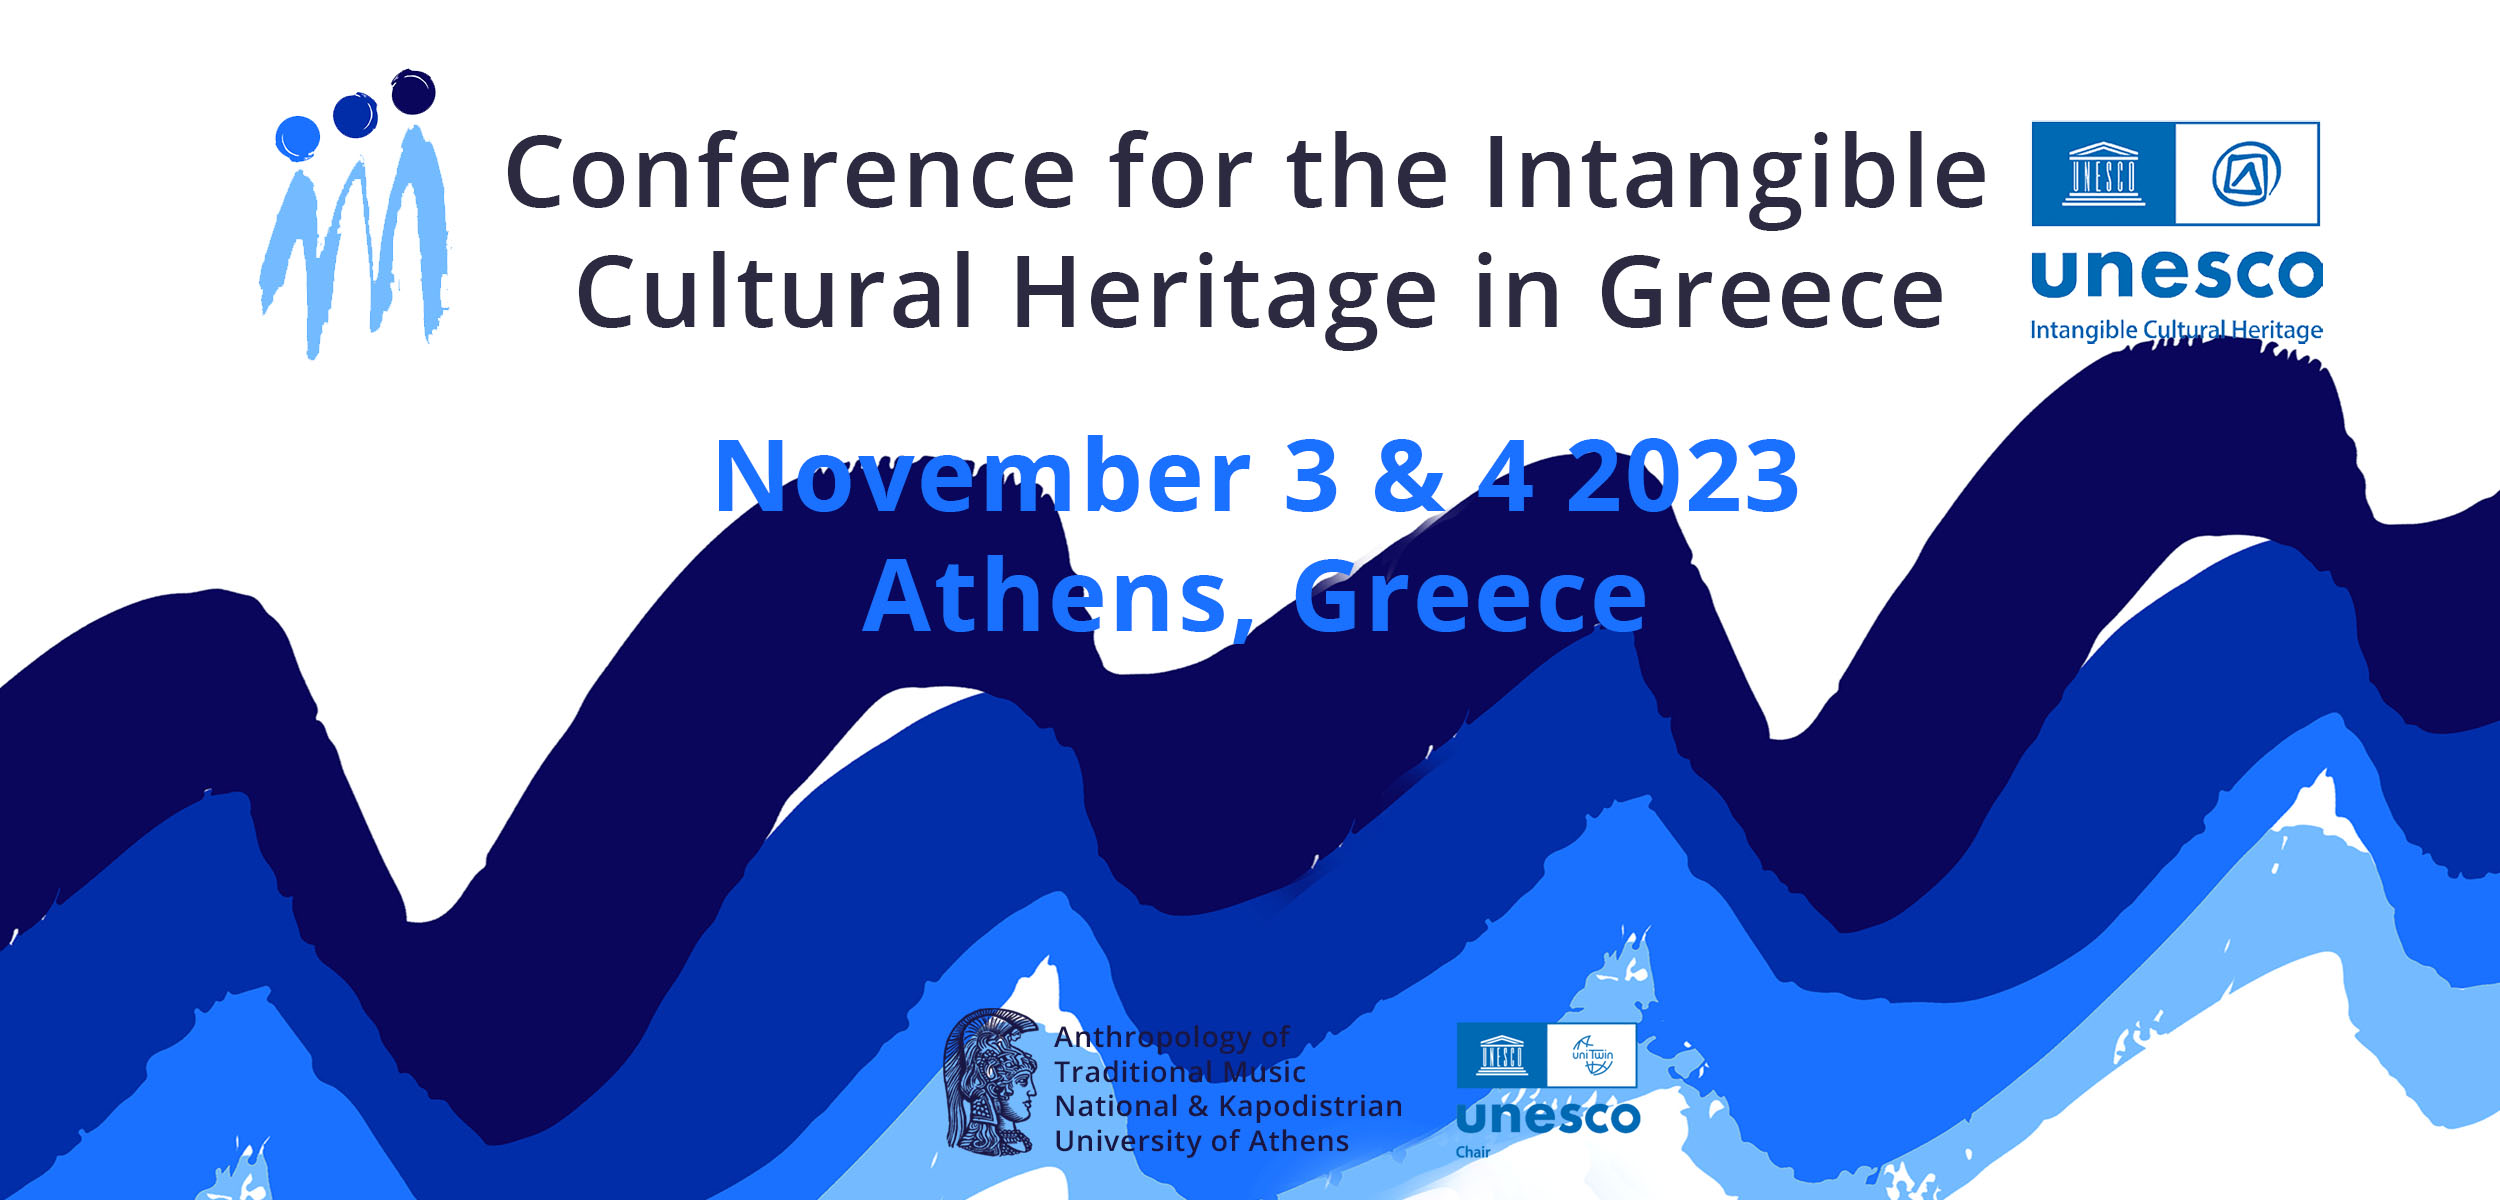 Conference for the 20th Anniversary of the UNESCO Convention 2003 on Intangible Cultural Heritage in Greece : A critical reappraisal